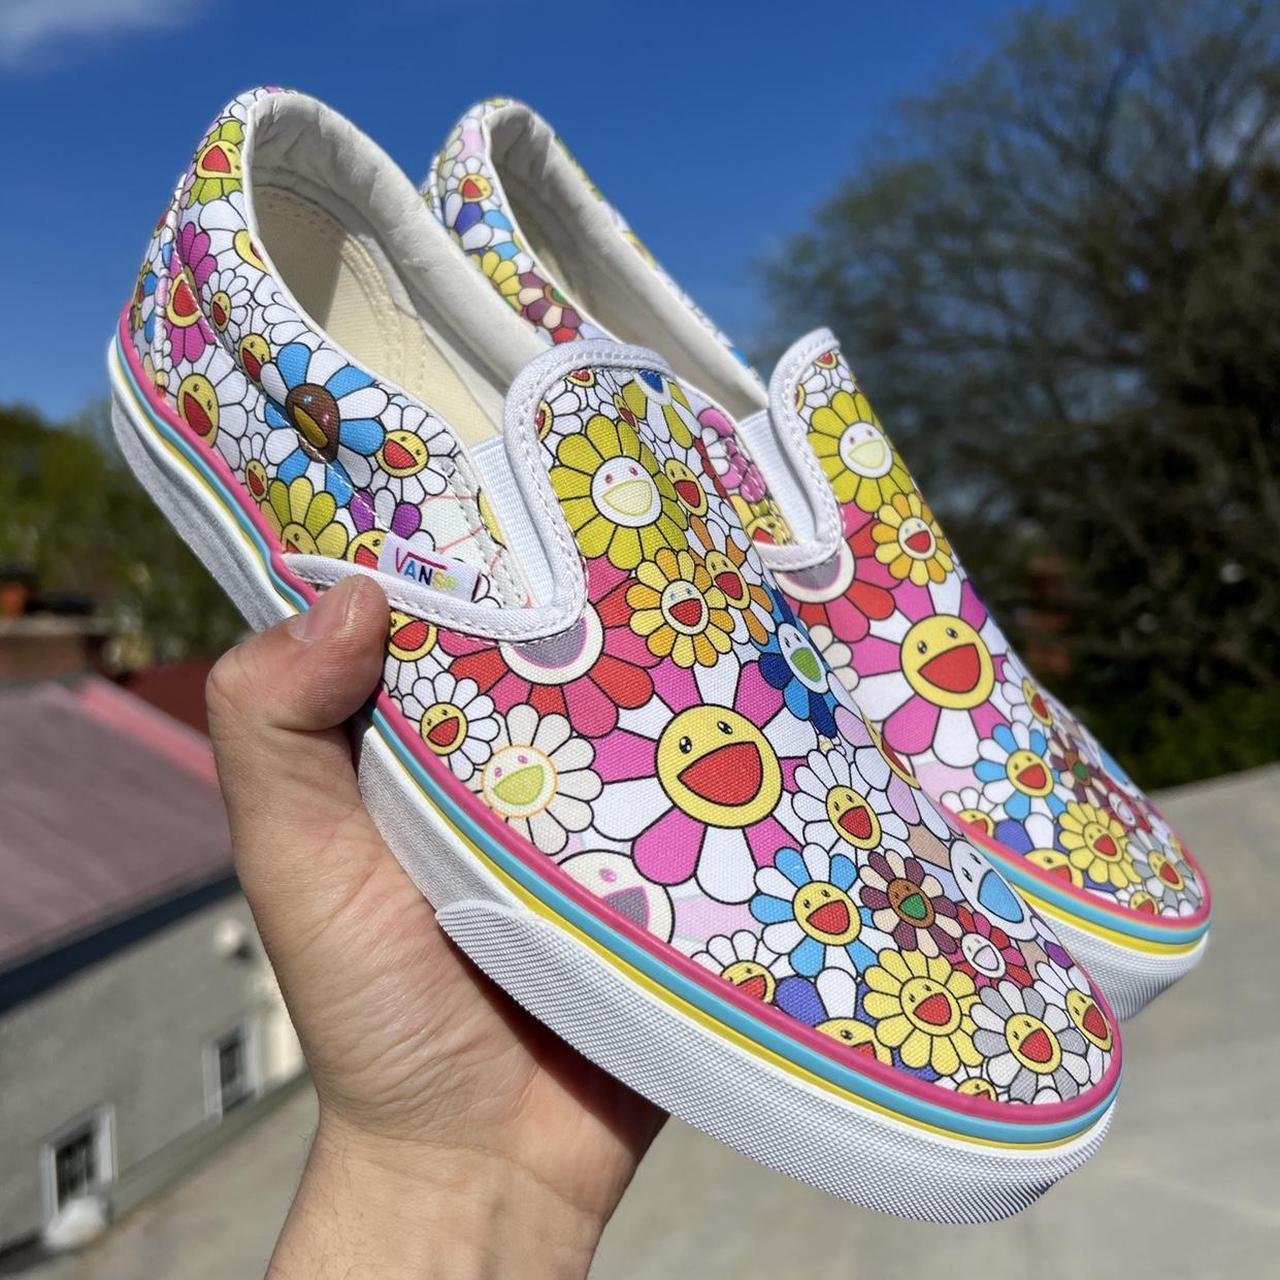 A Good Look At The Vault by Vans x Takashi Murakami Collection